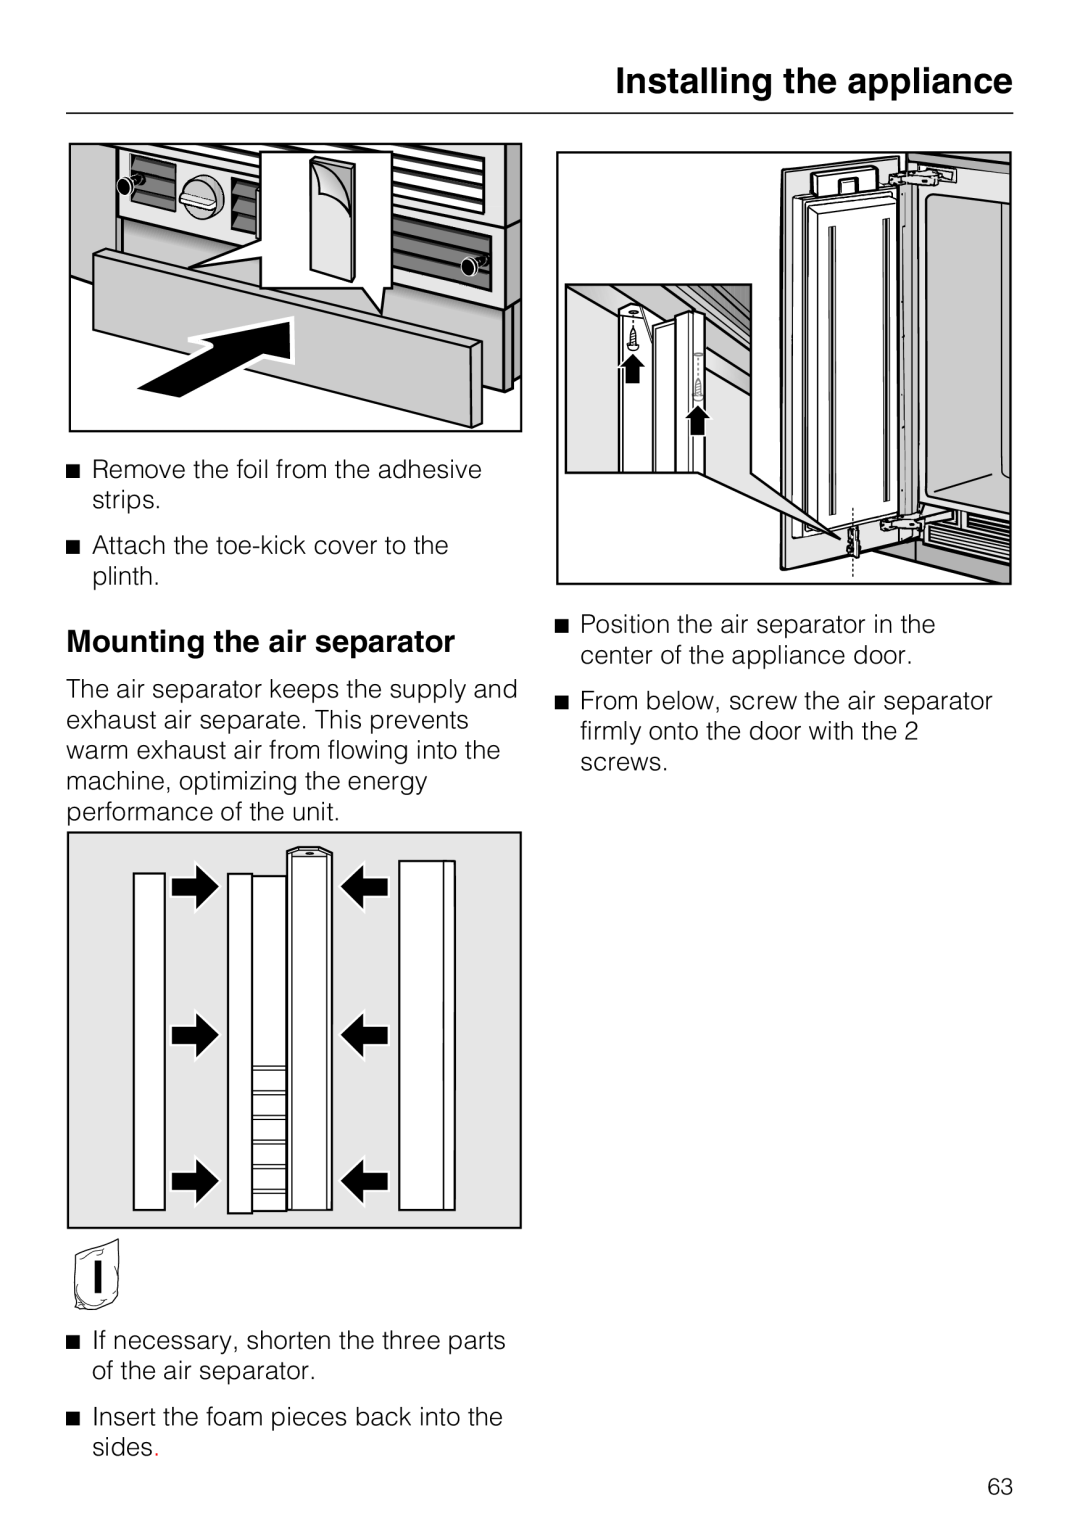 Miele 09 920 570 installation instructions Mounting the air separator, Installing the appliance 